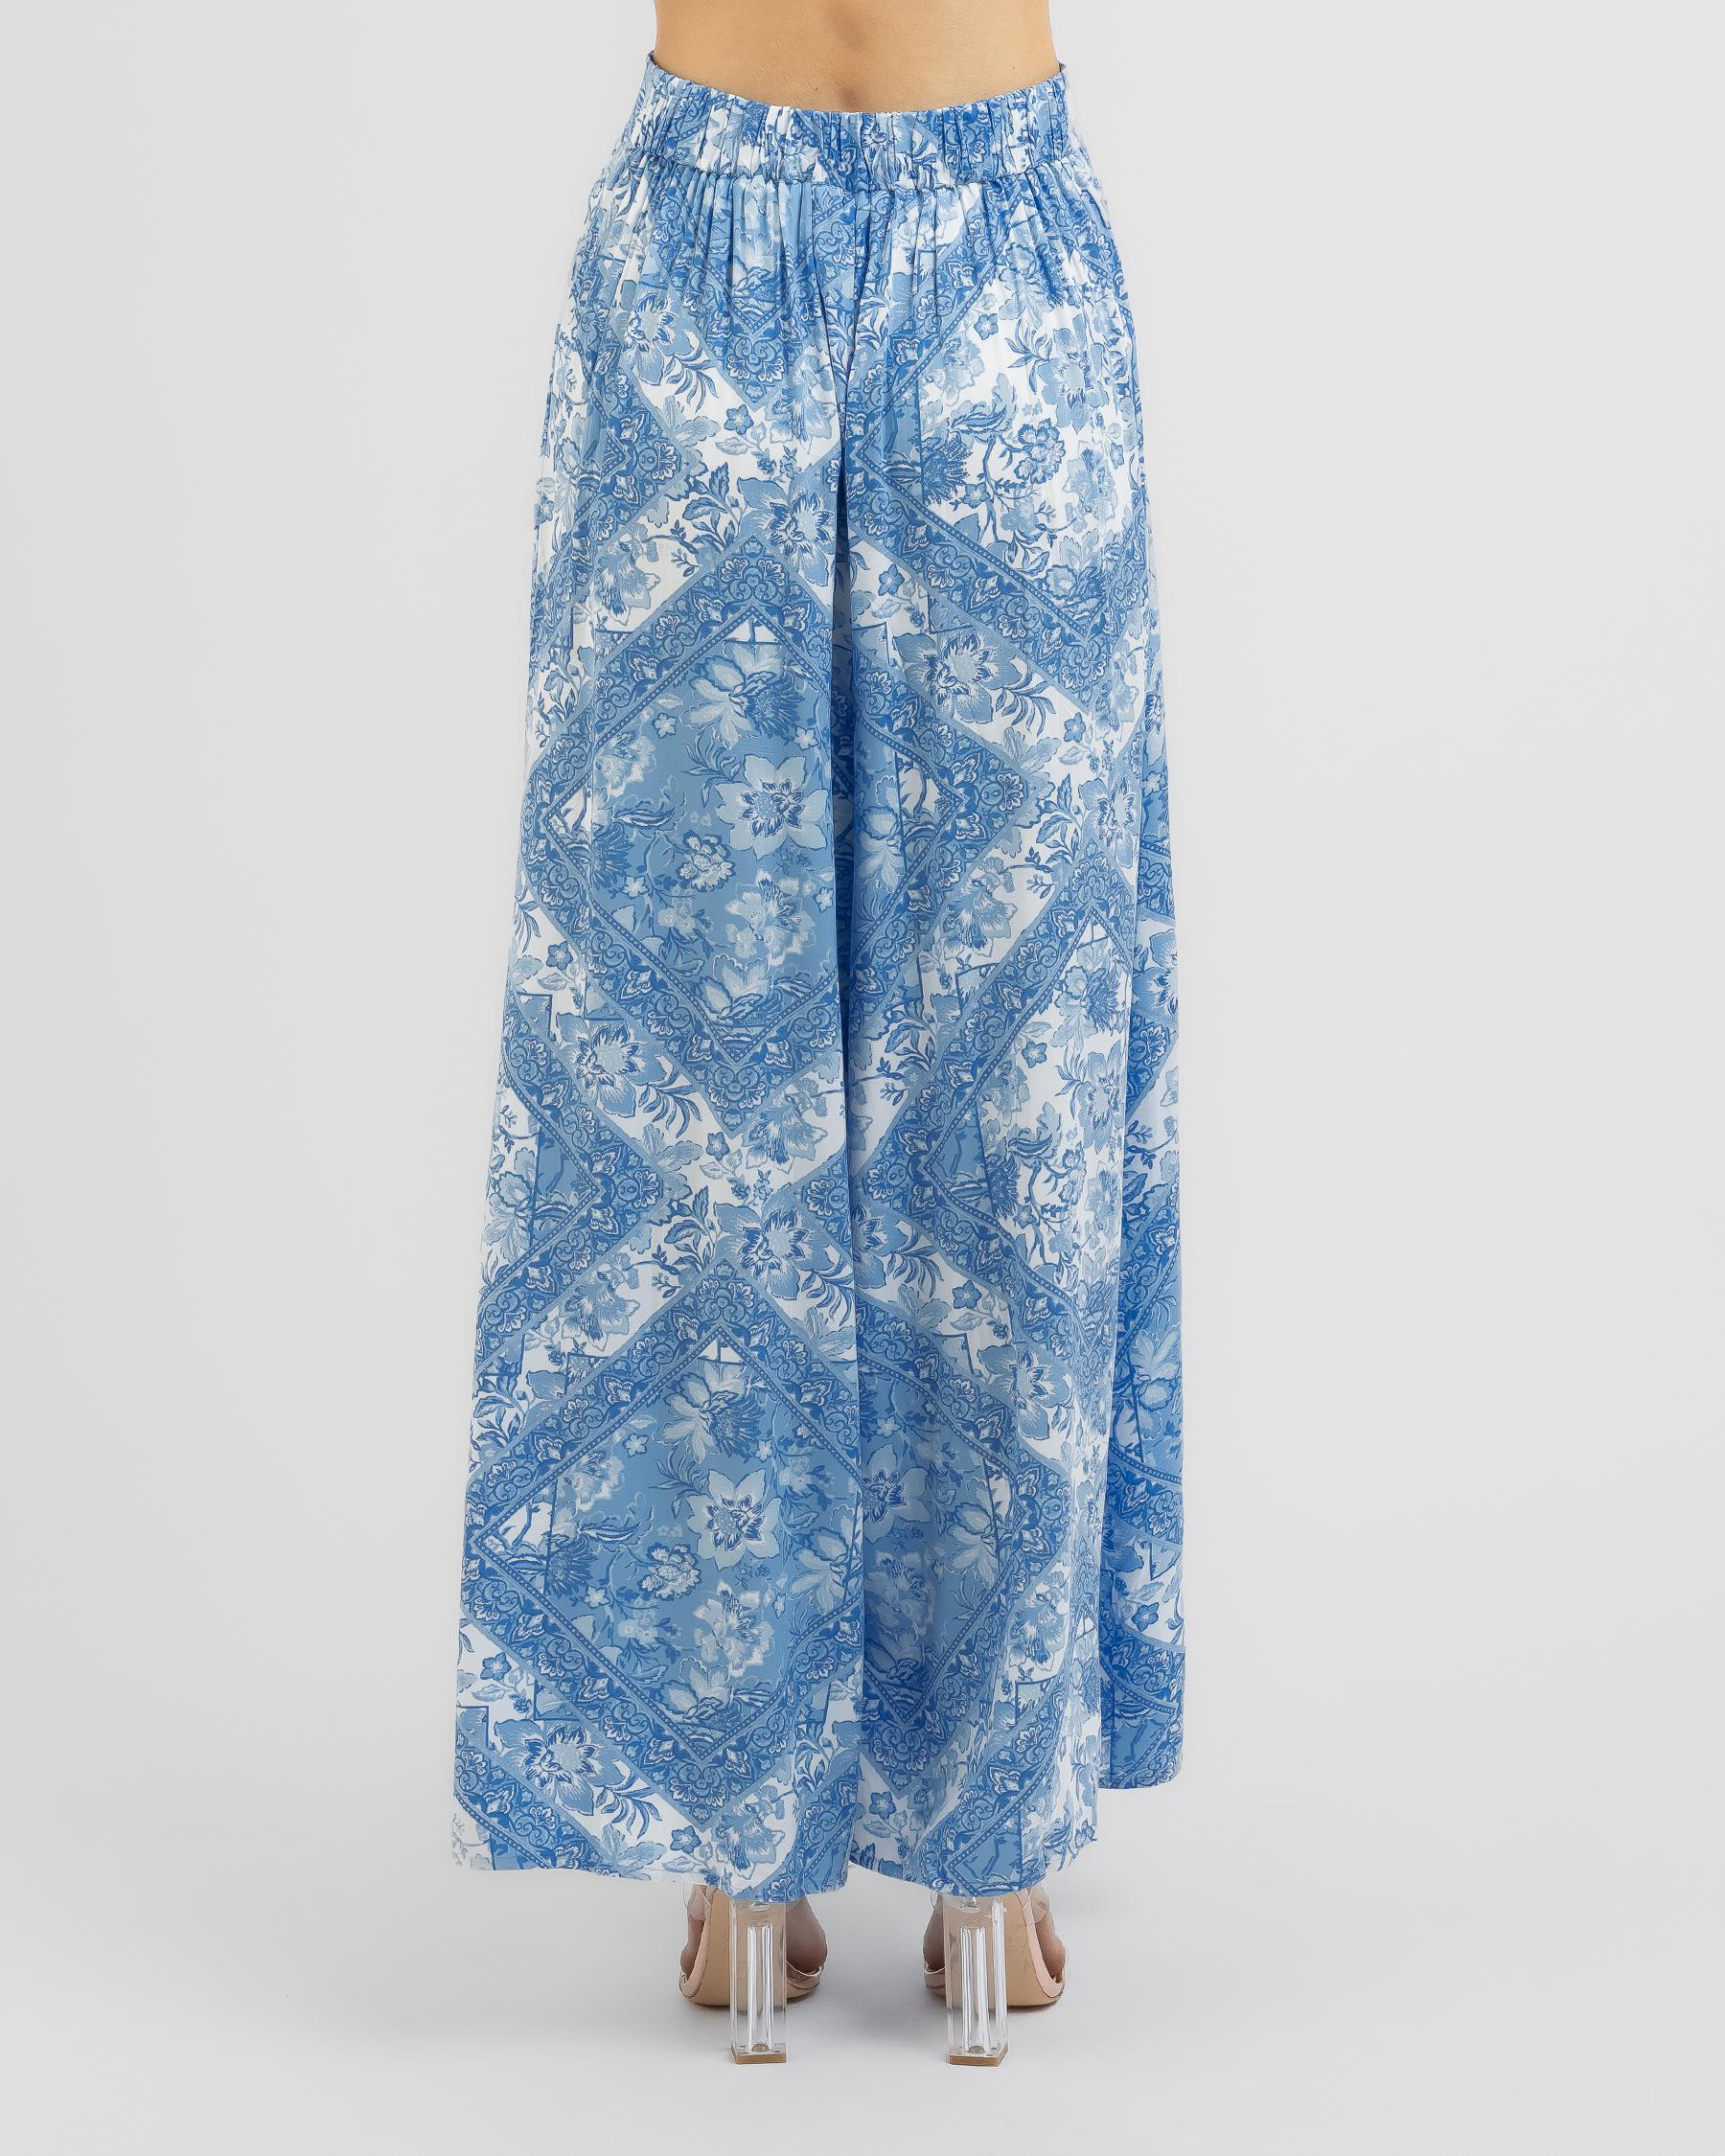 Shop Label Of Love Alanna Pants In Blue - Fast Shipping & Easy Returns ...